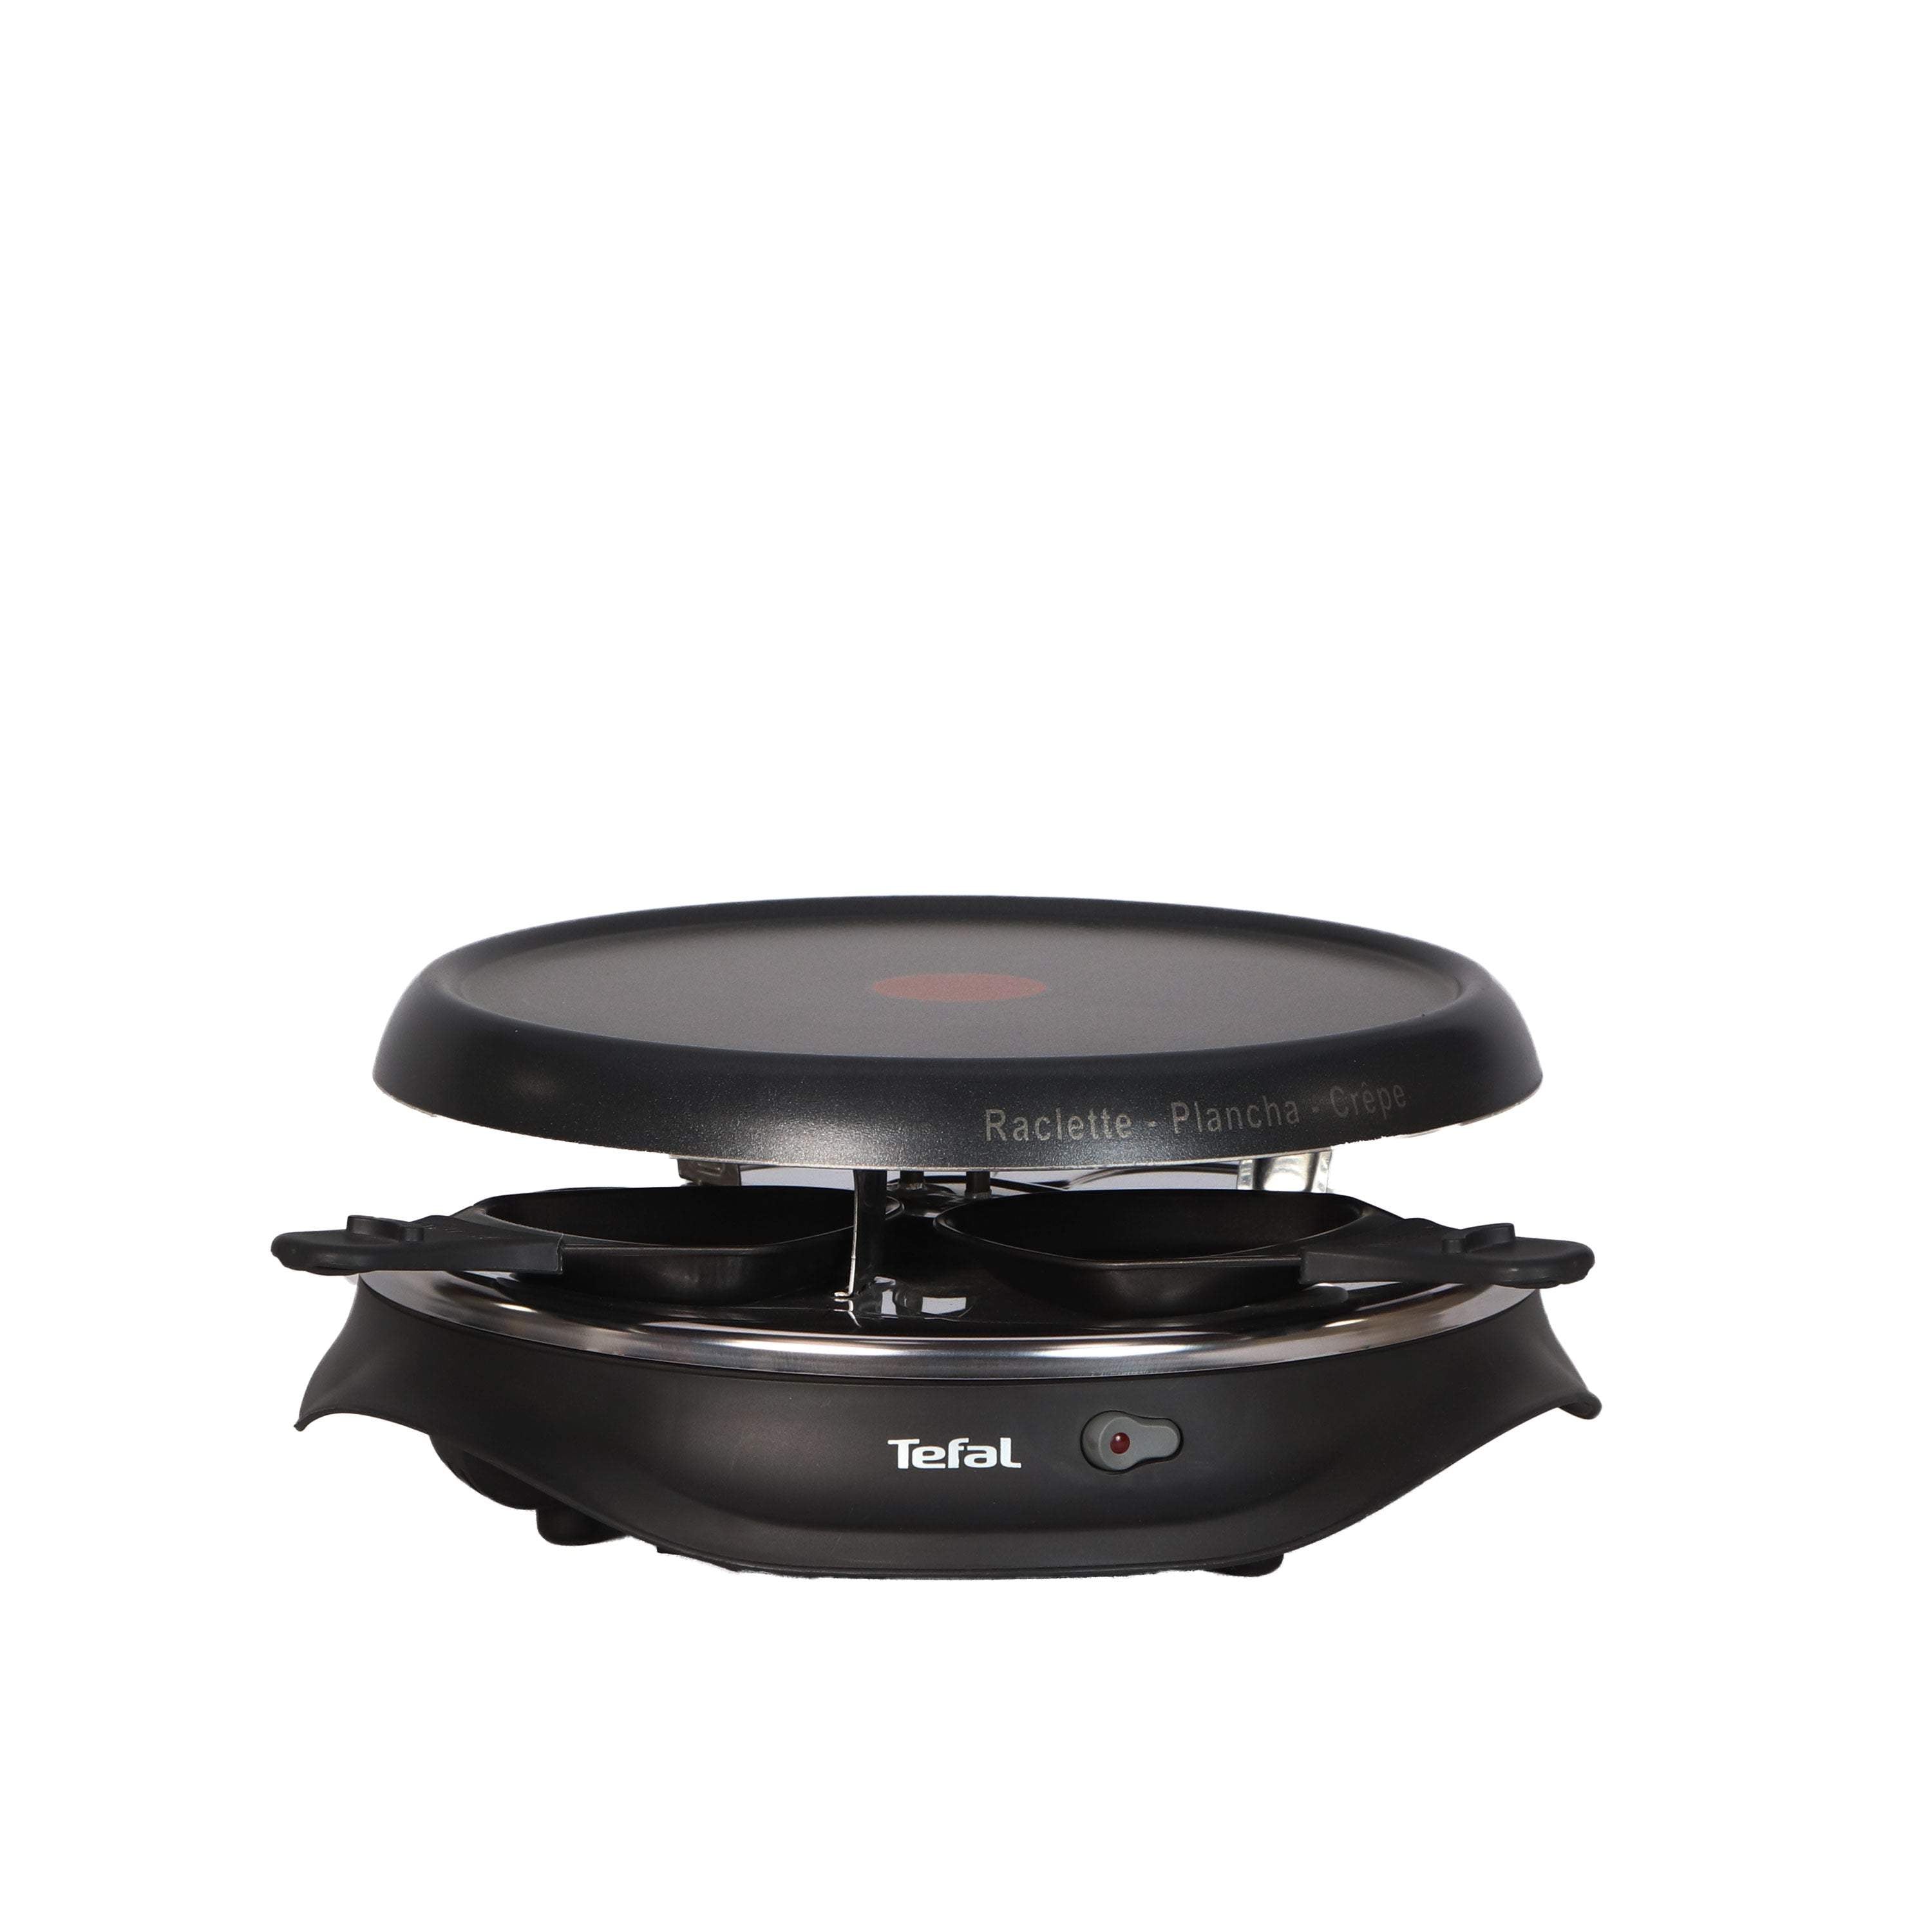 Tefal 3 in 1 RE507816 Raclette/Crepes & BBQ Oven (Plancha) 6 Person-Royal Brands Co-